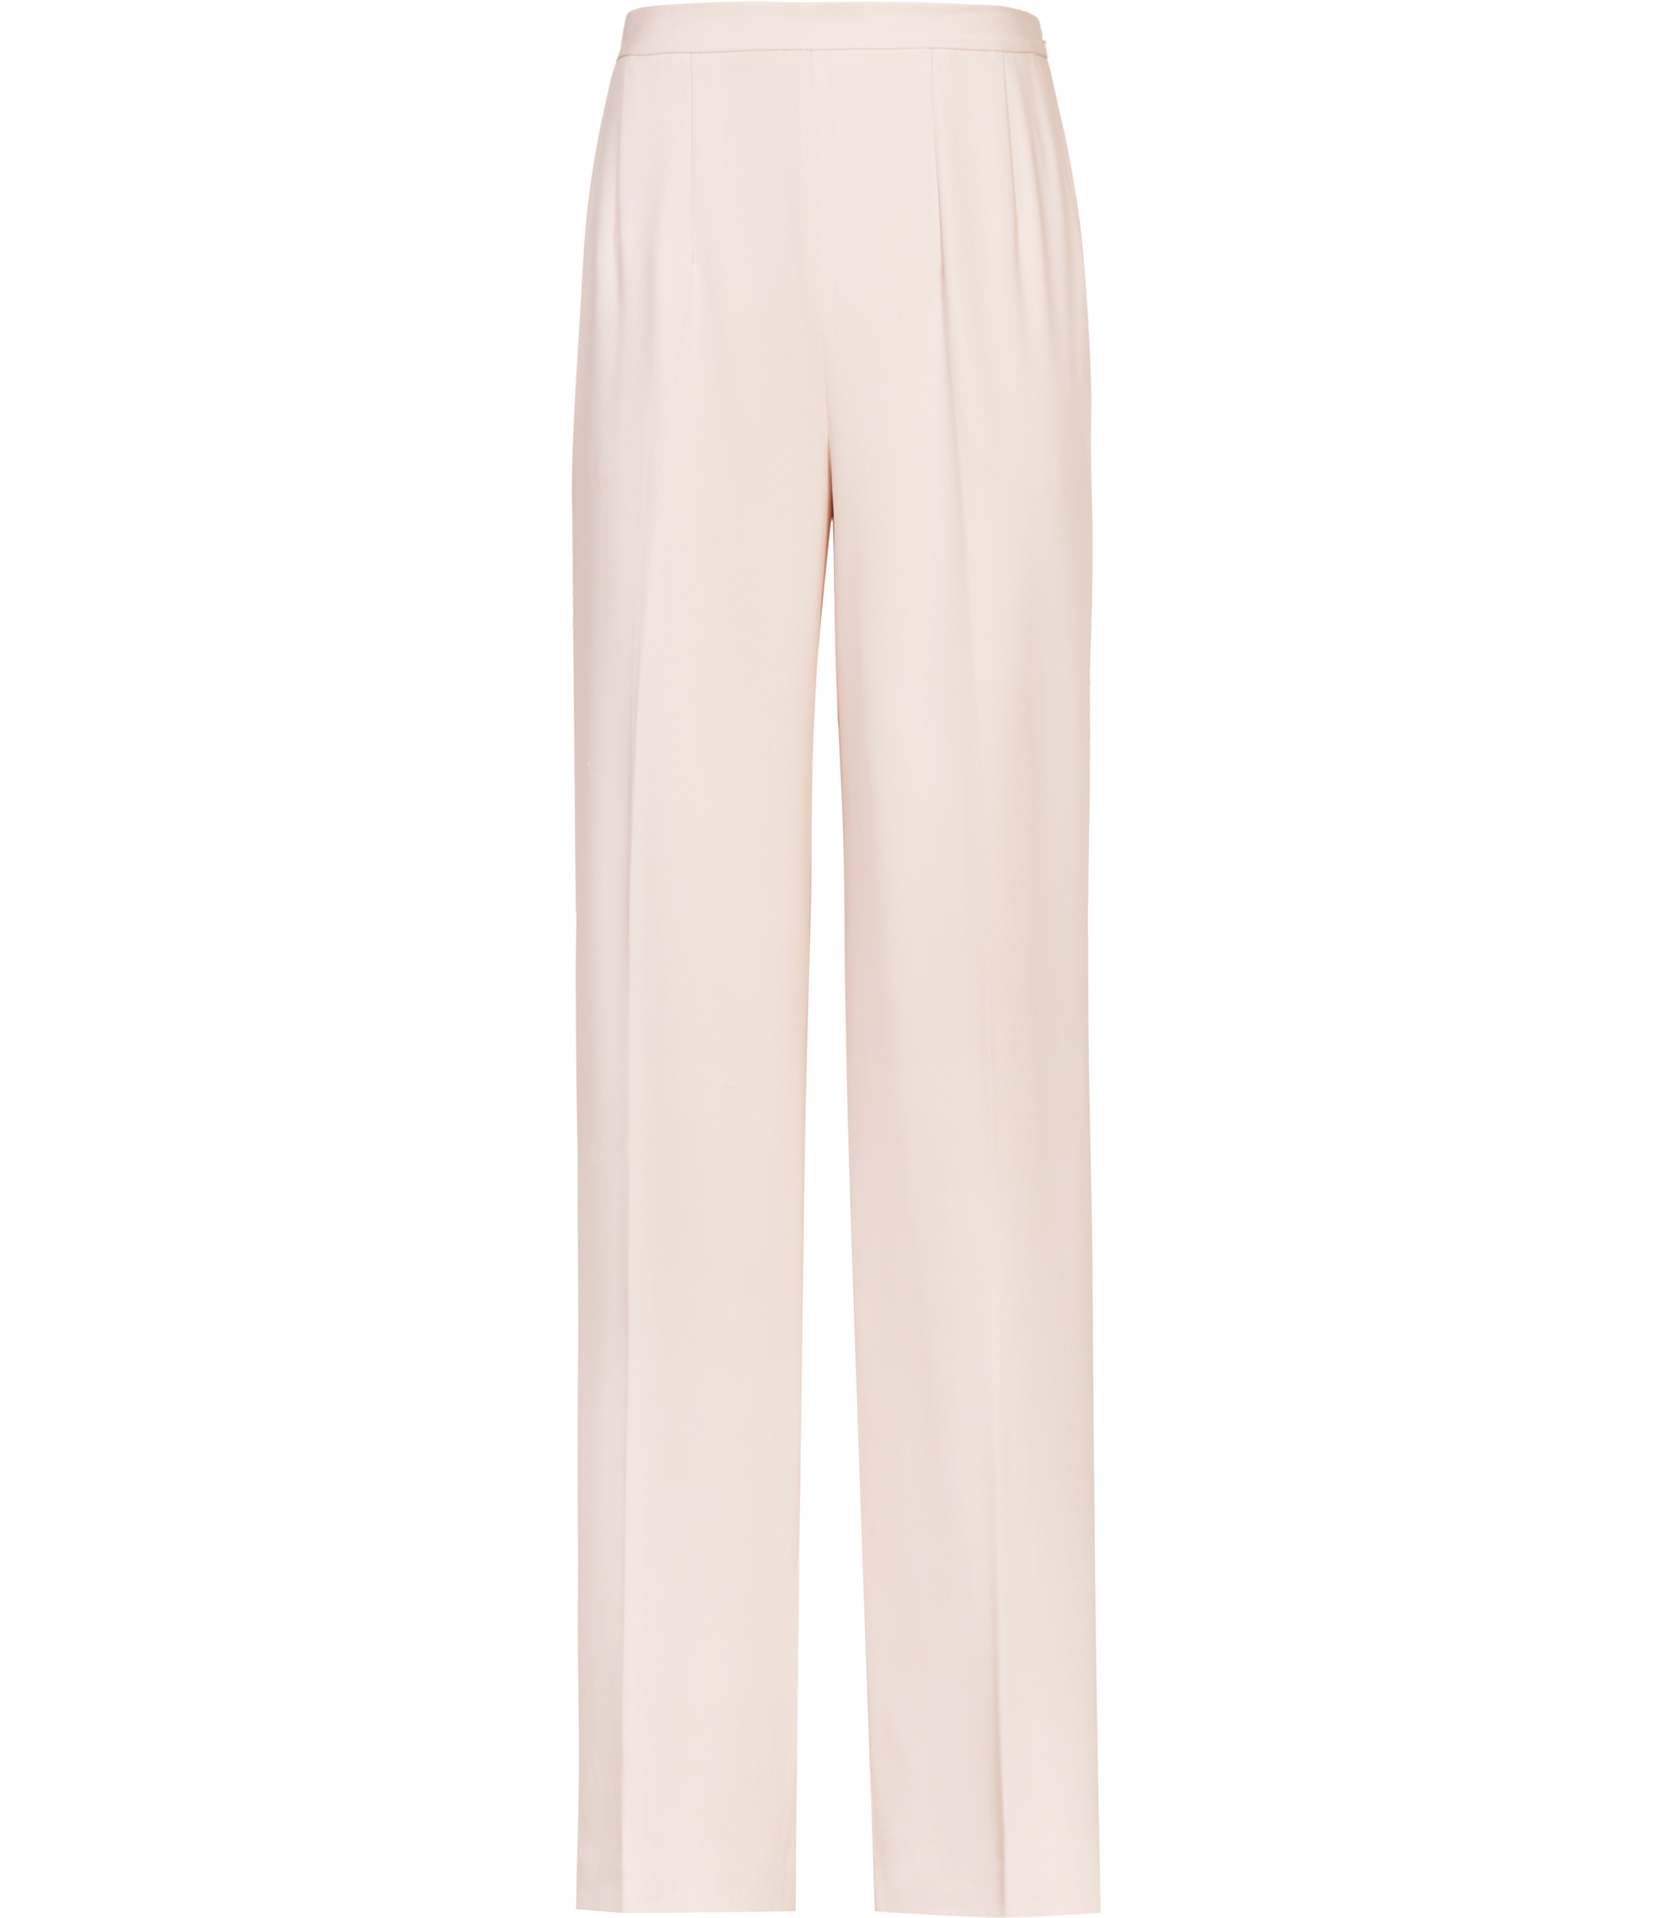 Reiss Capote Wide-Leg Trousers in Pink - Lyst